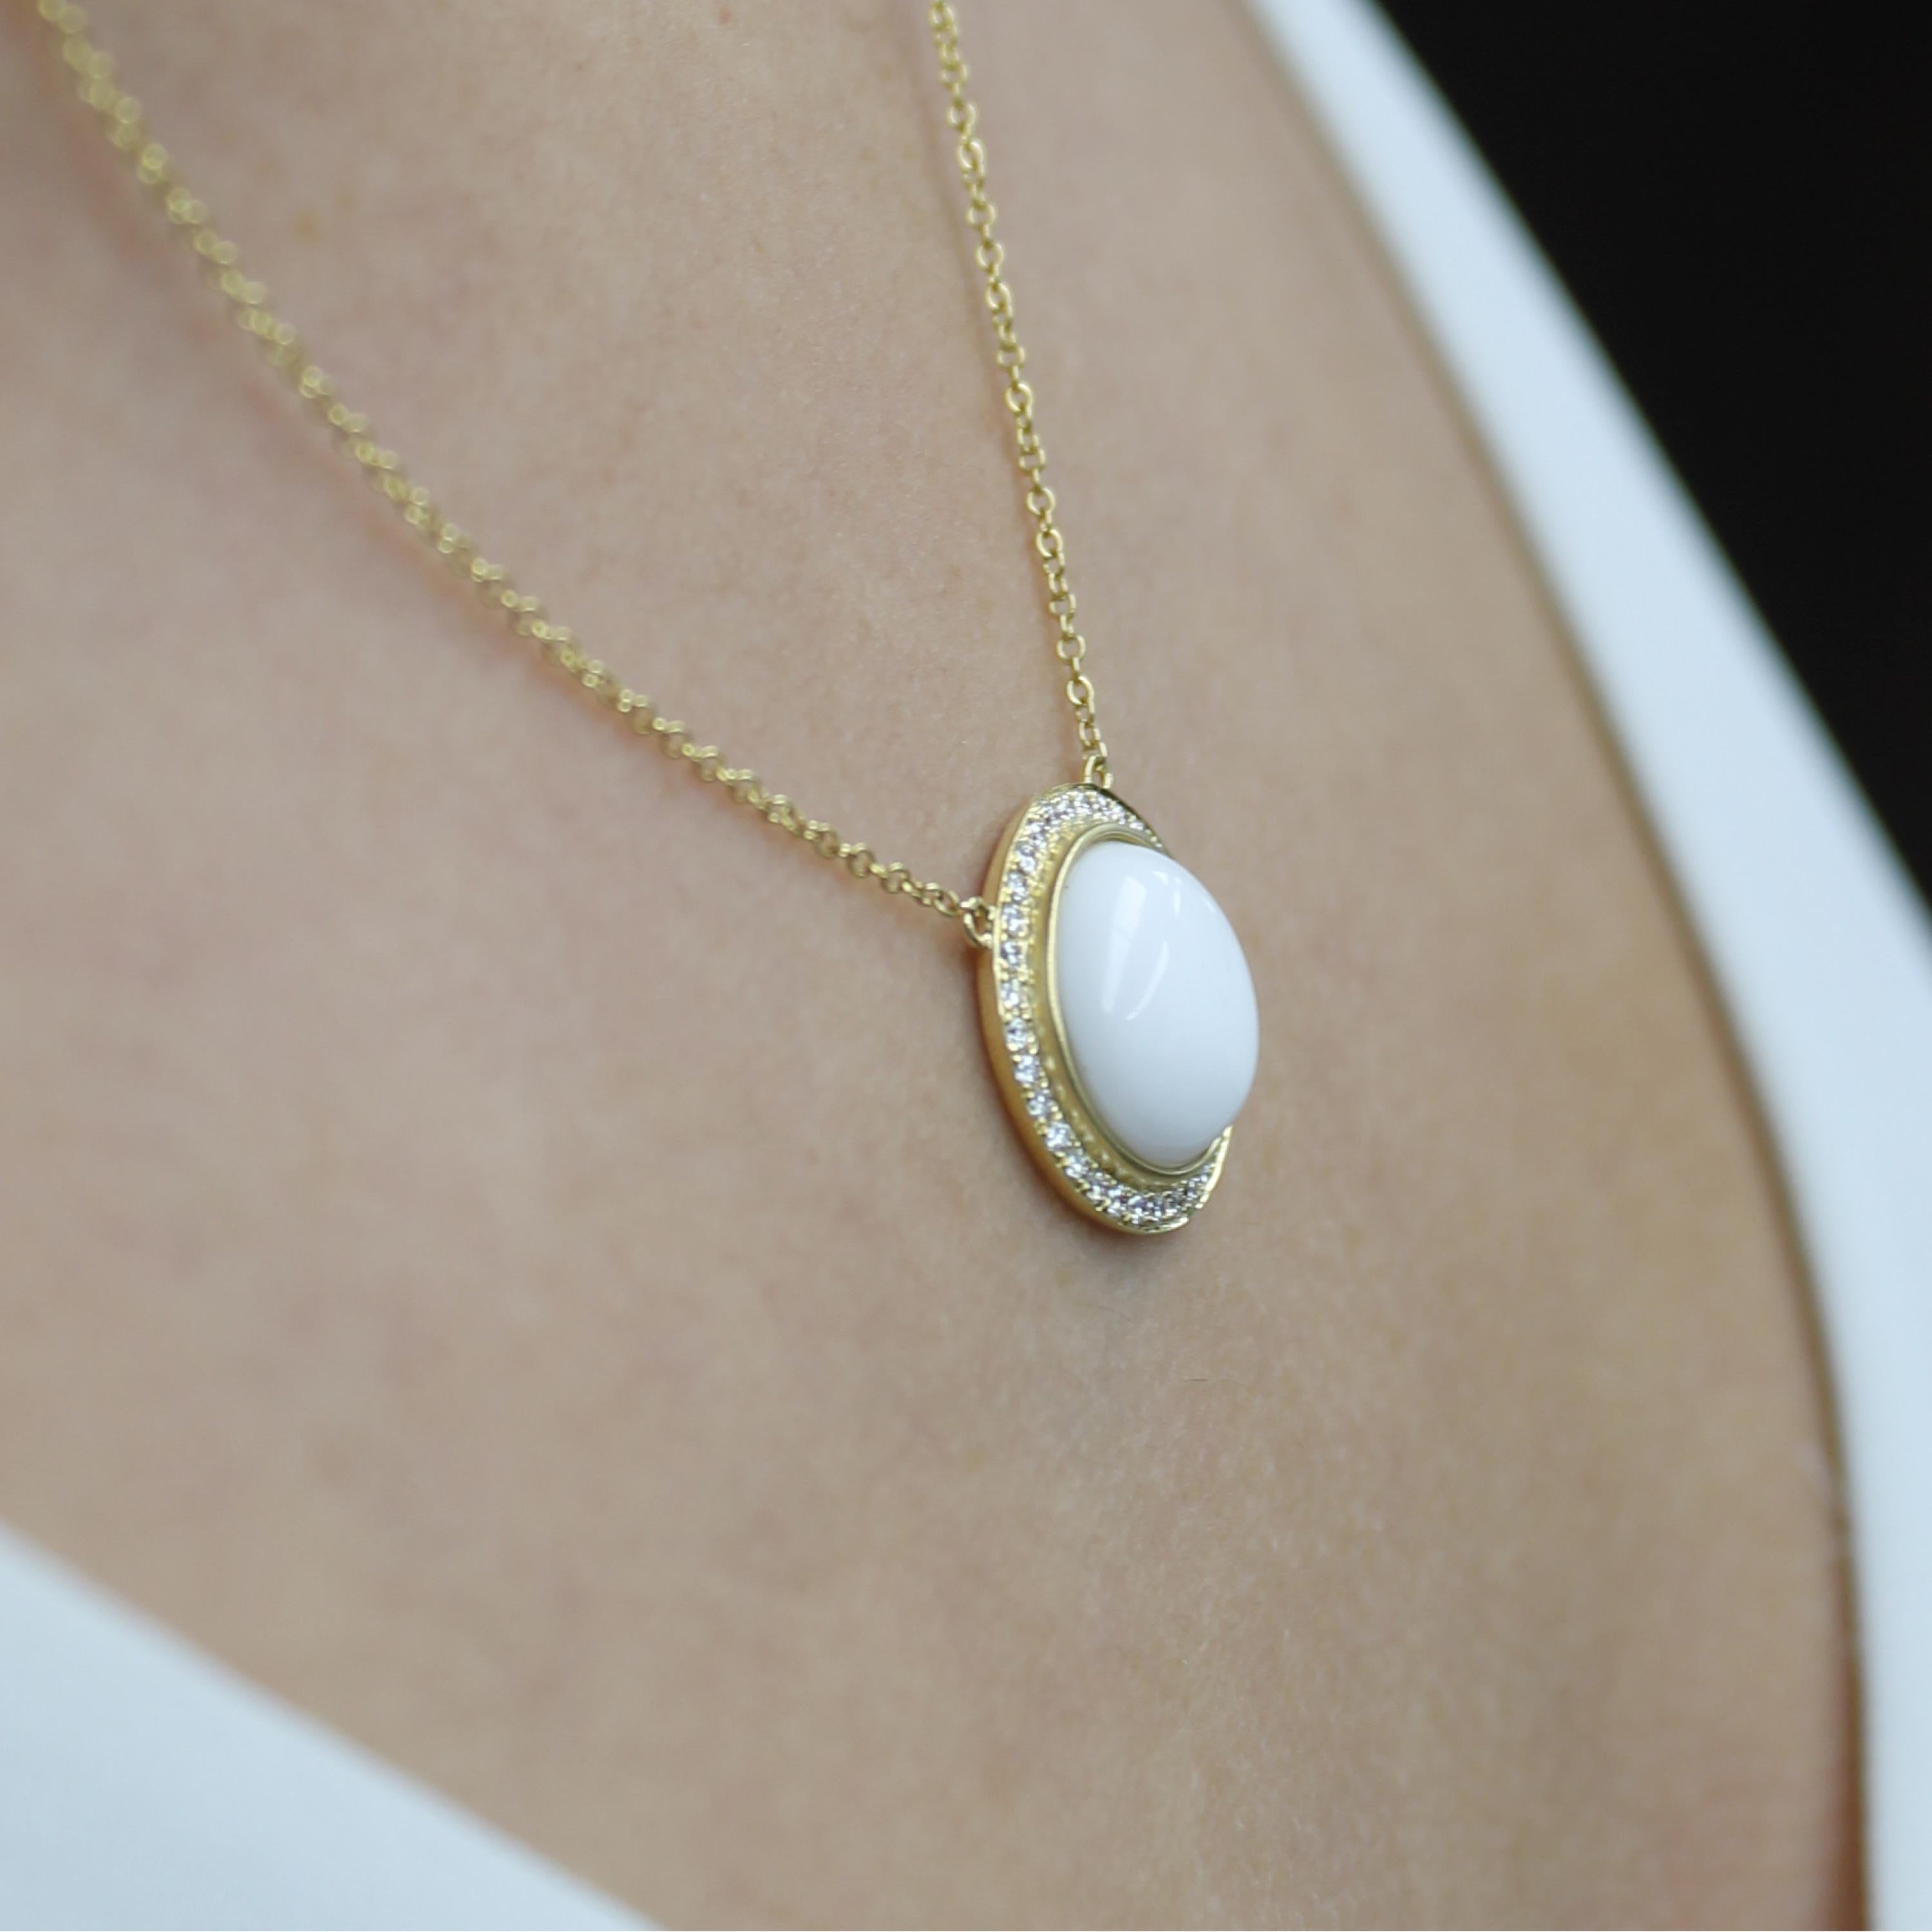 Contemporary Doves 18 Karat Gold Necklace with Round Cabochon-Cut White Agate and Diamonds For Sale